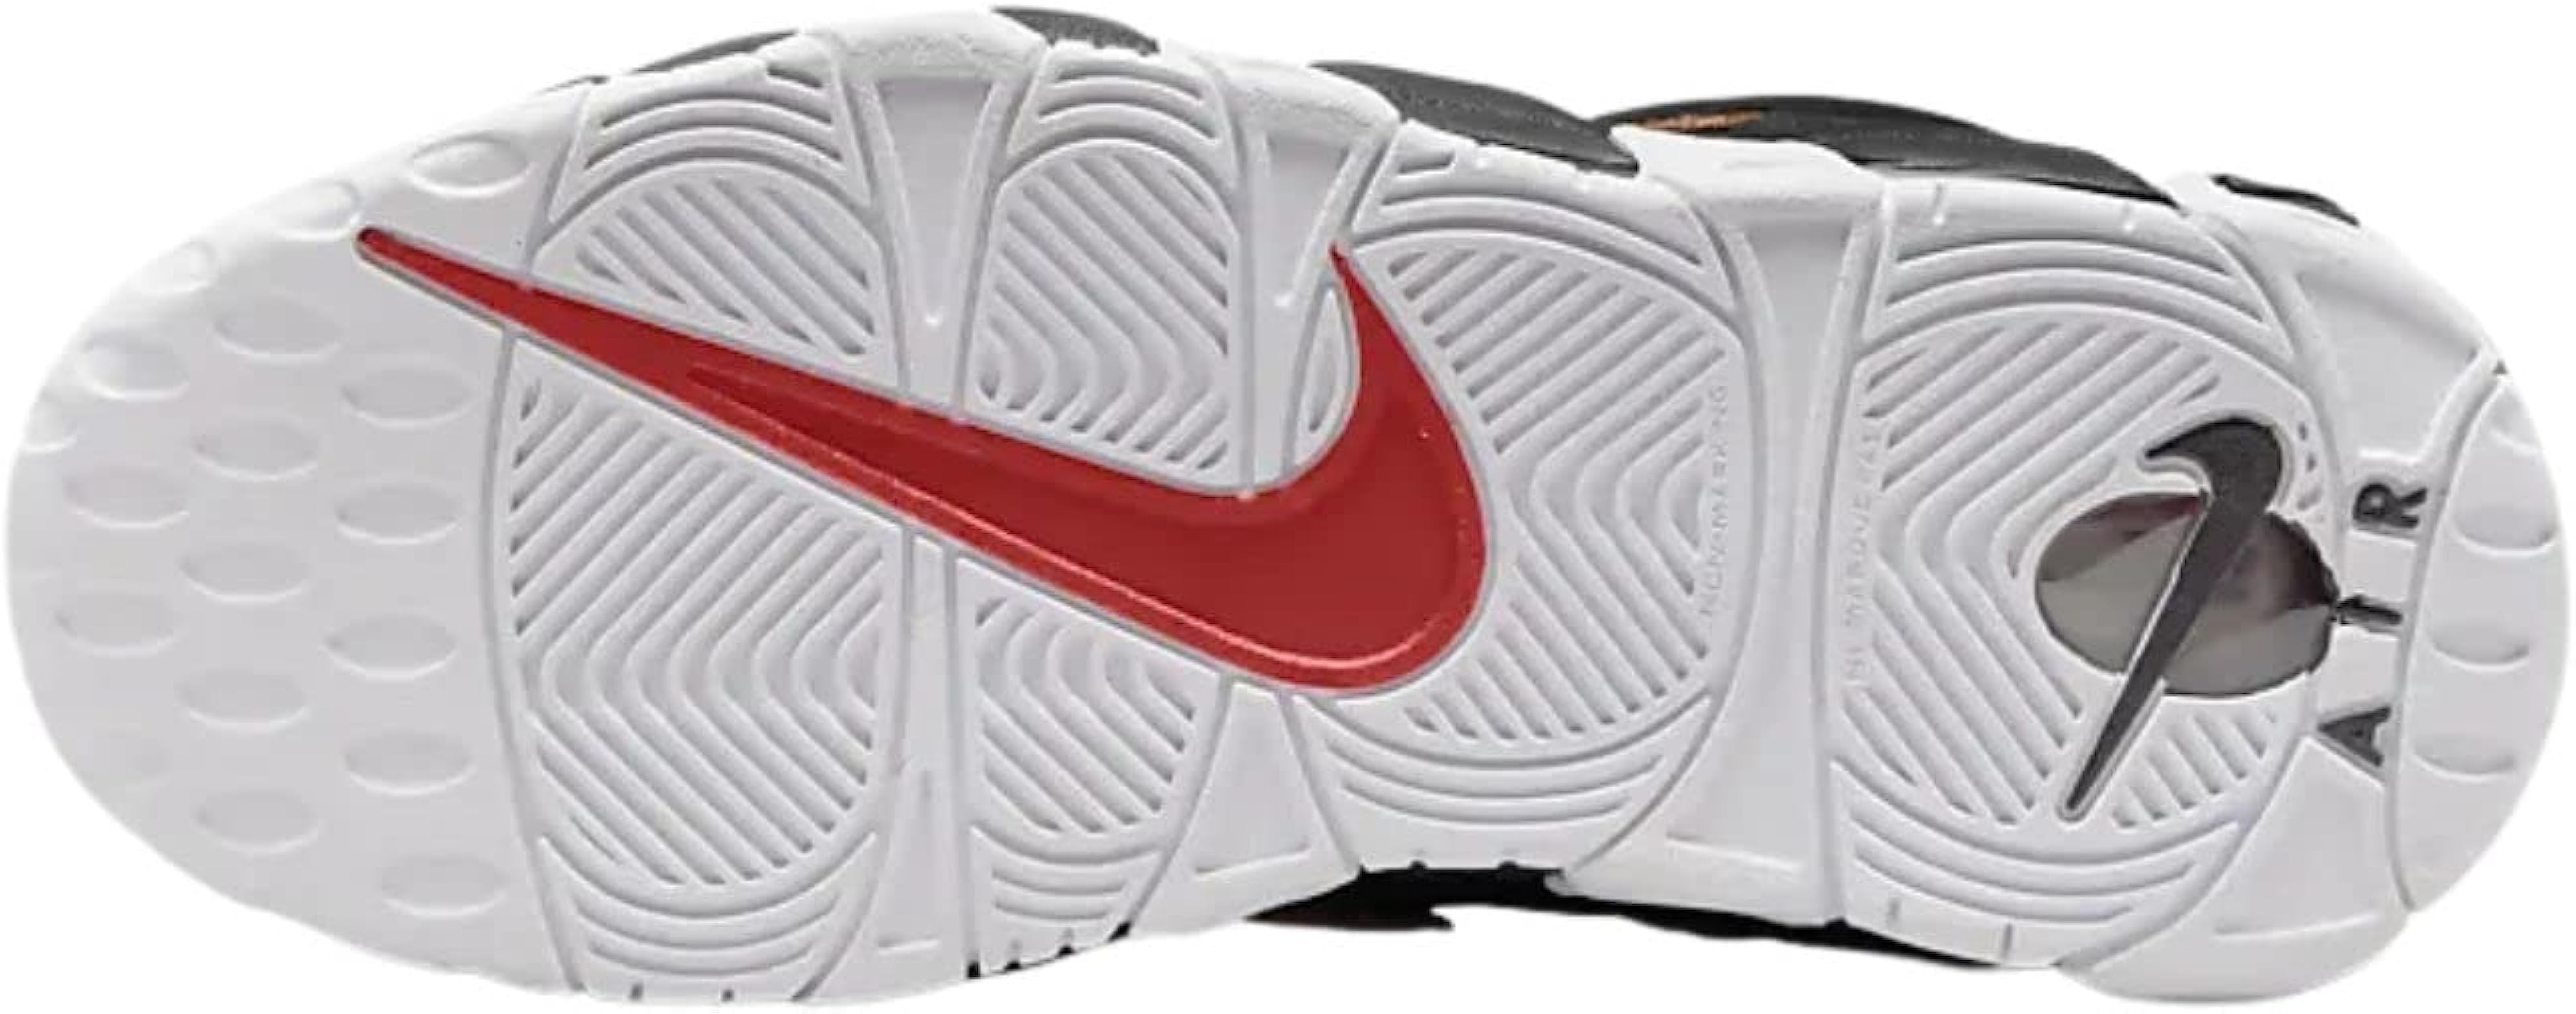 Nike Big Kid Air More Uptempo GS Basketball Trainers Shoes